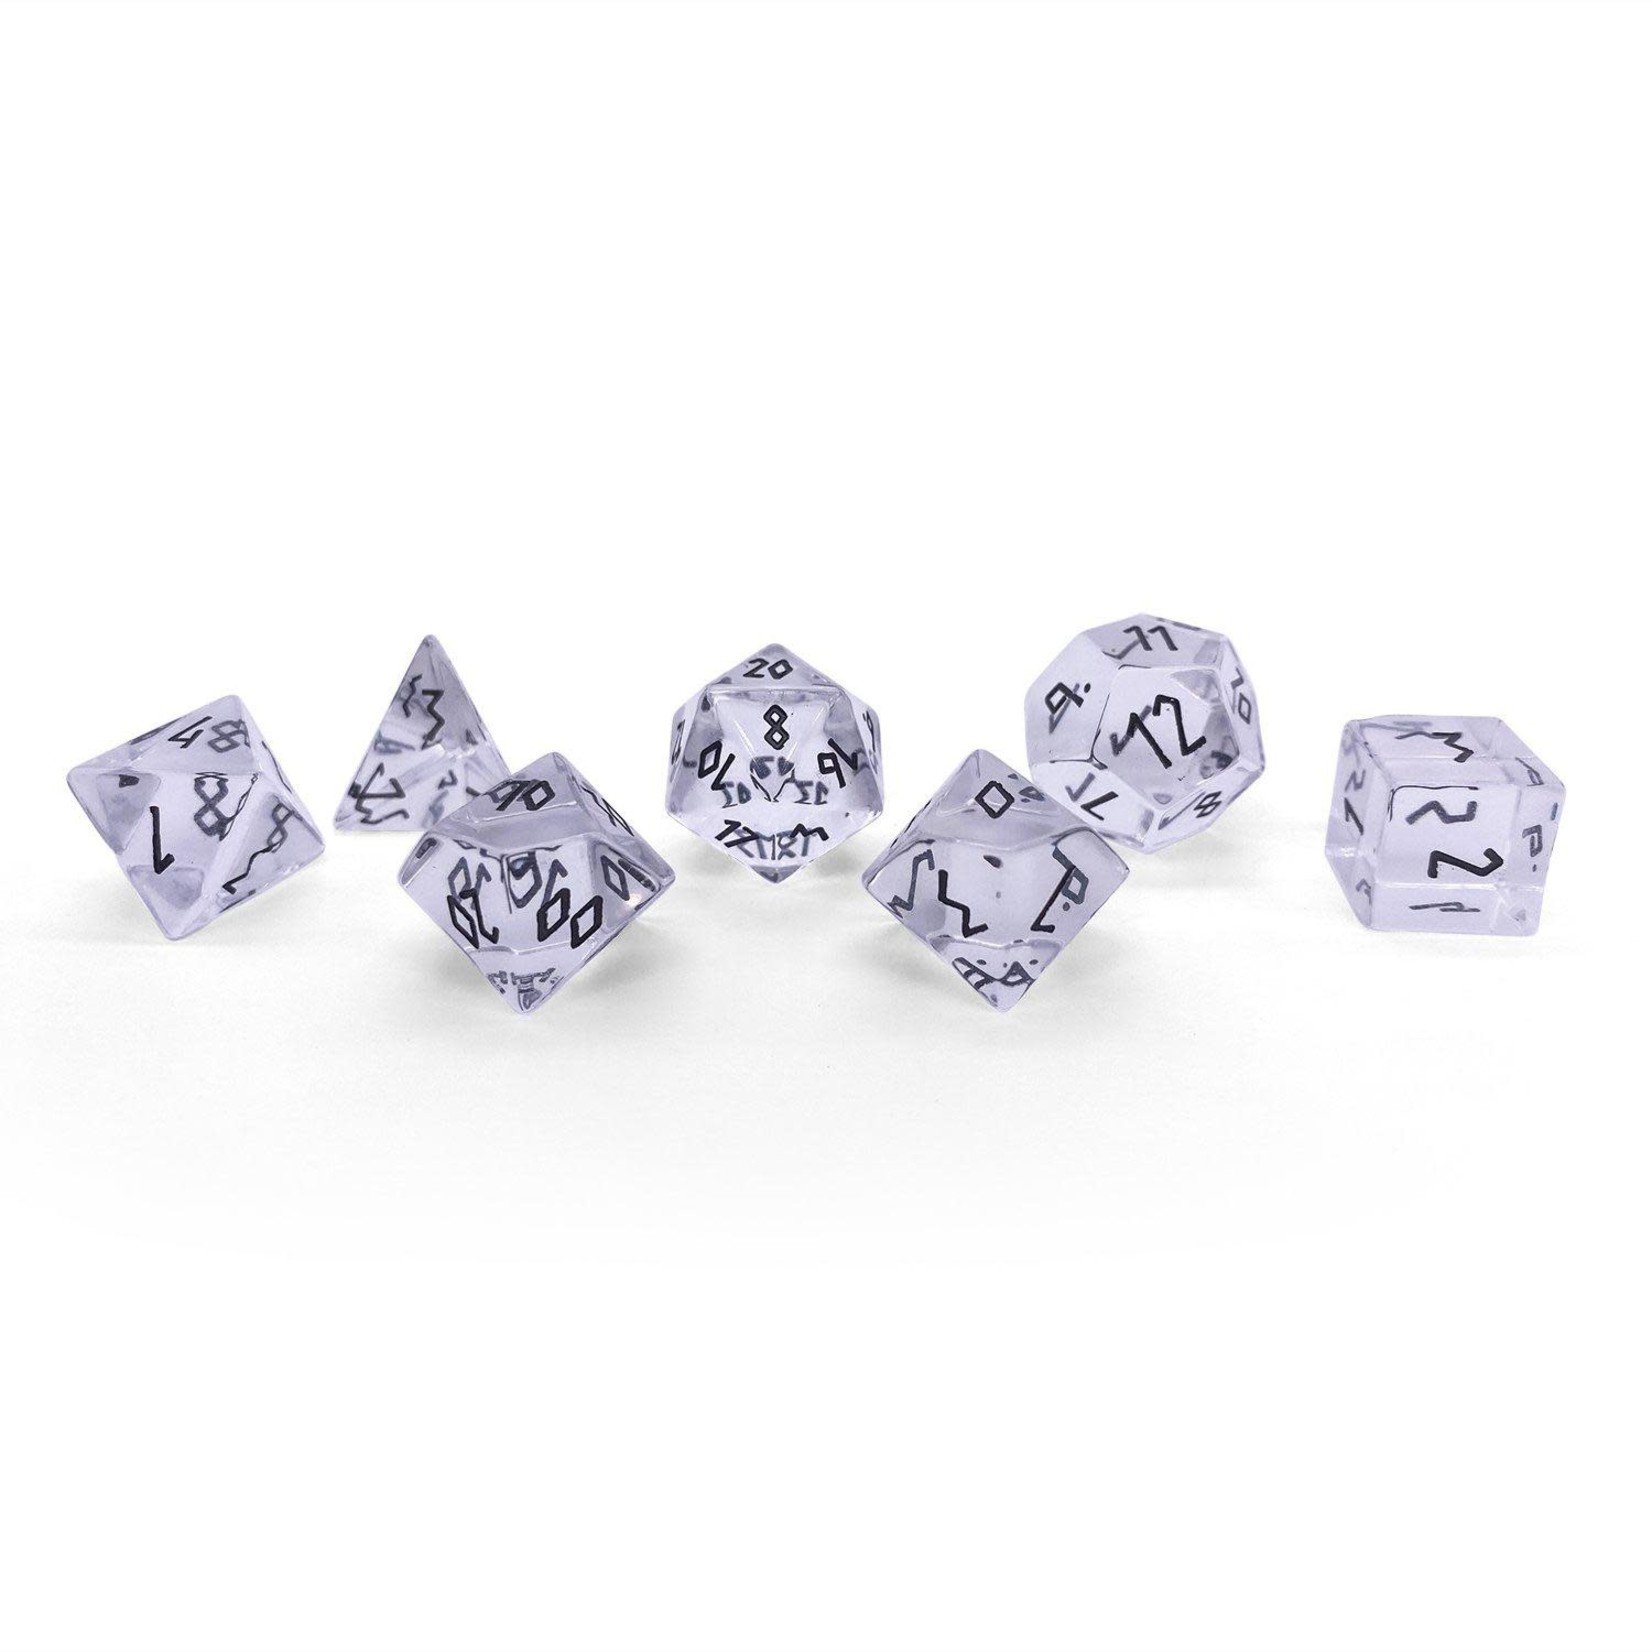 Norse Foundry Norse Foundry Gemstone Dice: Clear Crystal - Black Font